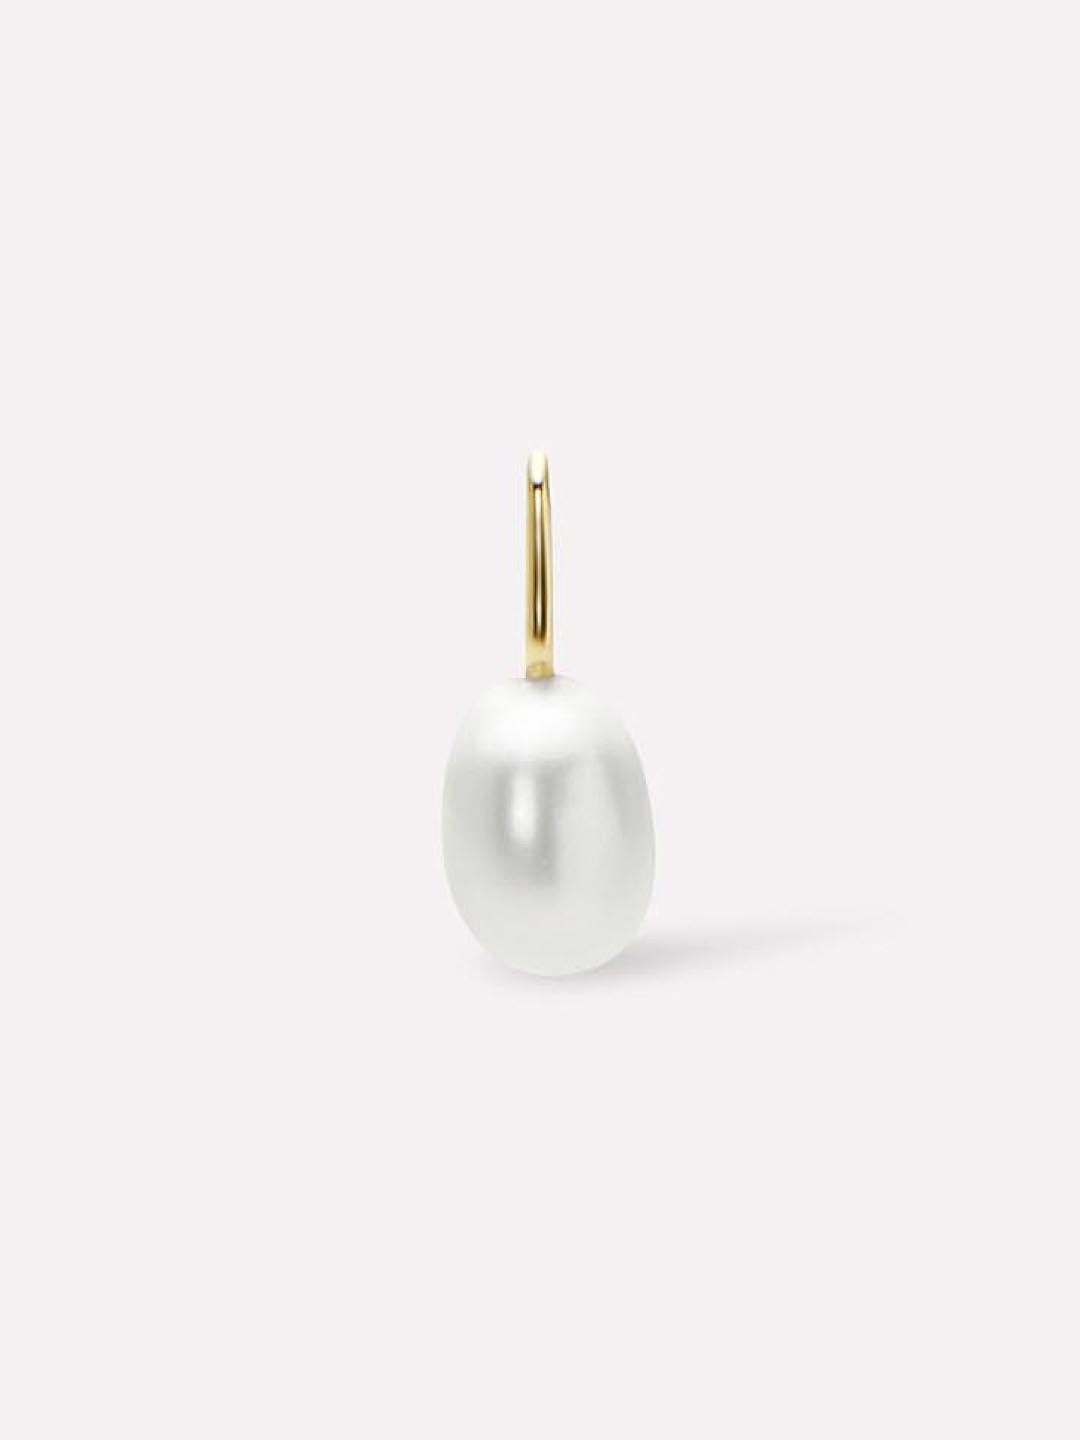 Solid Gold Pendant - Gold Pearl Charm - Ana Luisa Jewelry